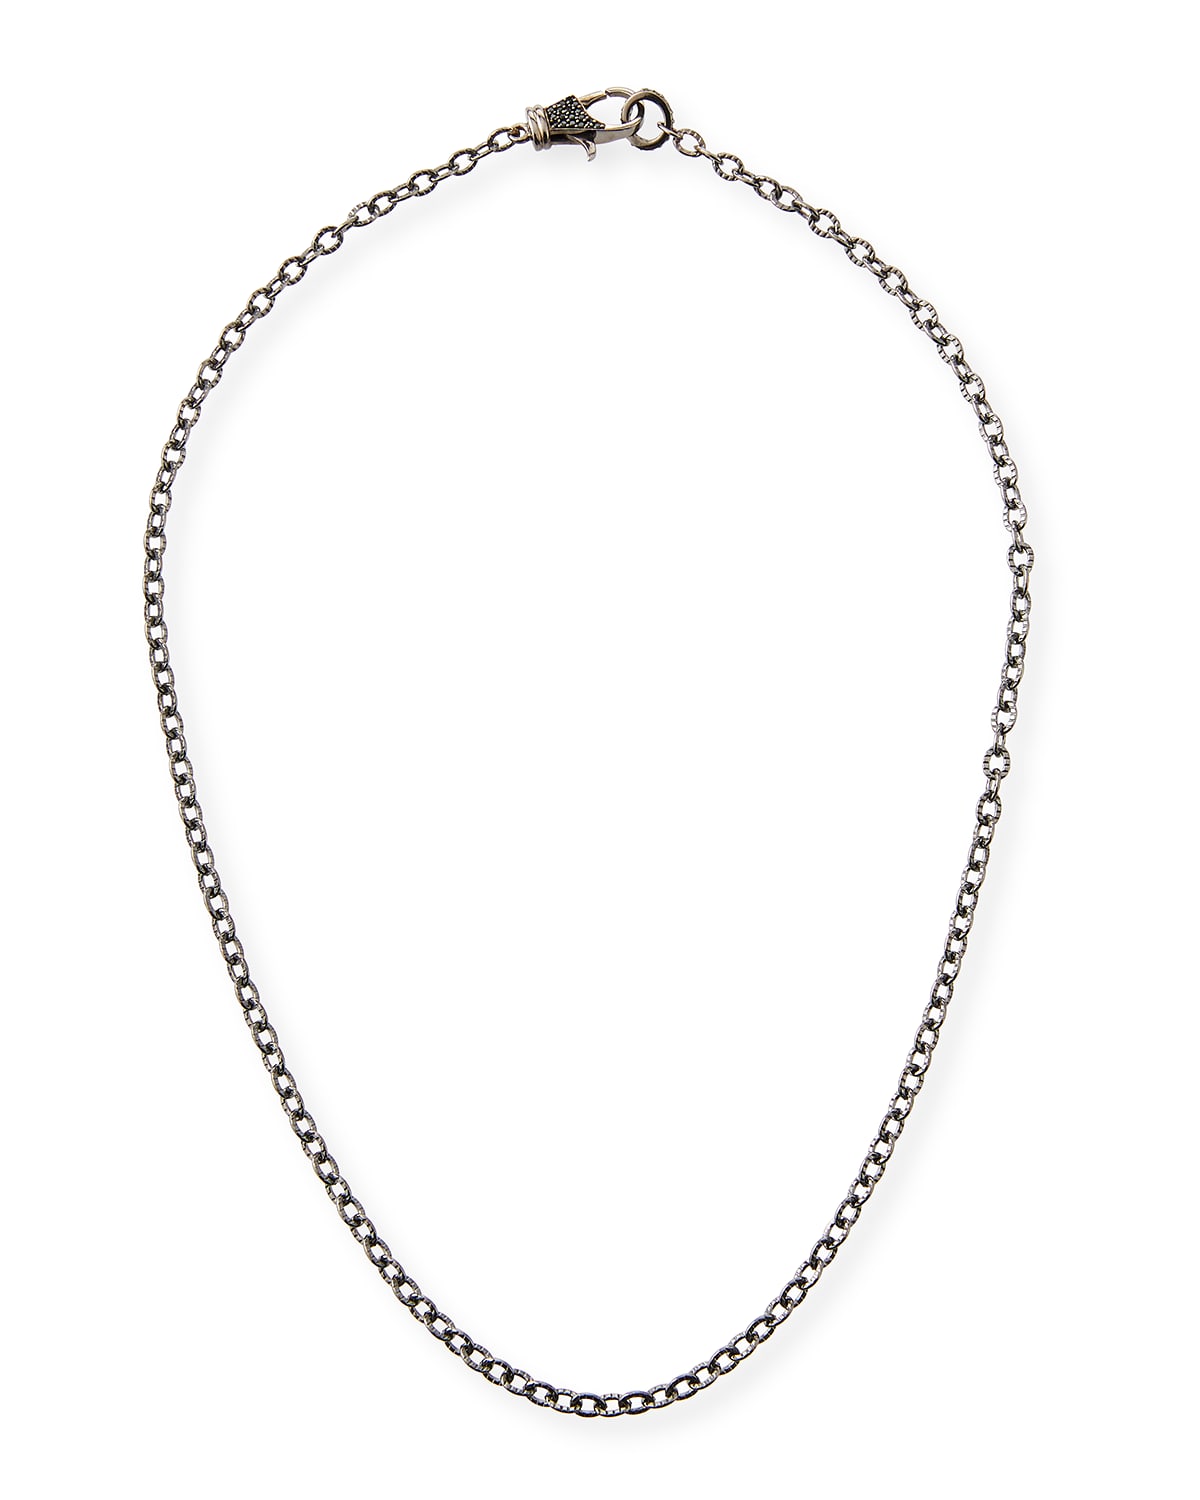 Margo Morrison Rhodium-plated Sterling Silver Chain Necklace With Spinel Clasp, 18"